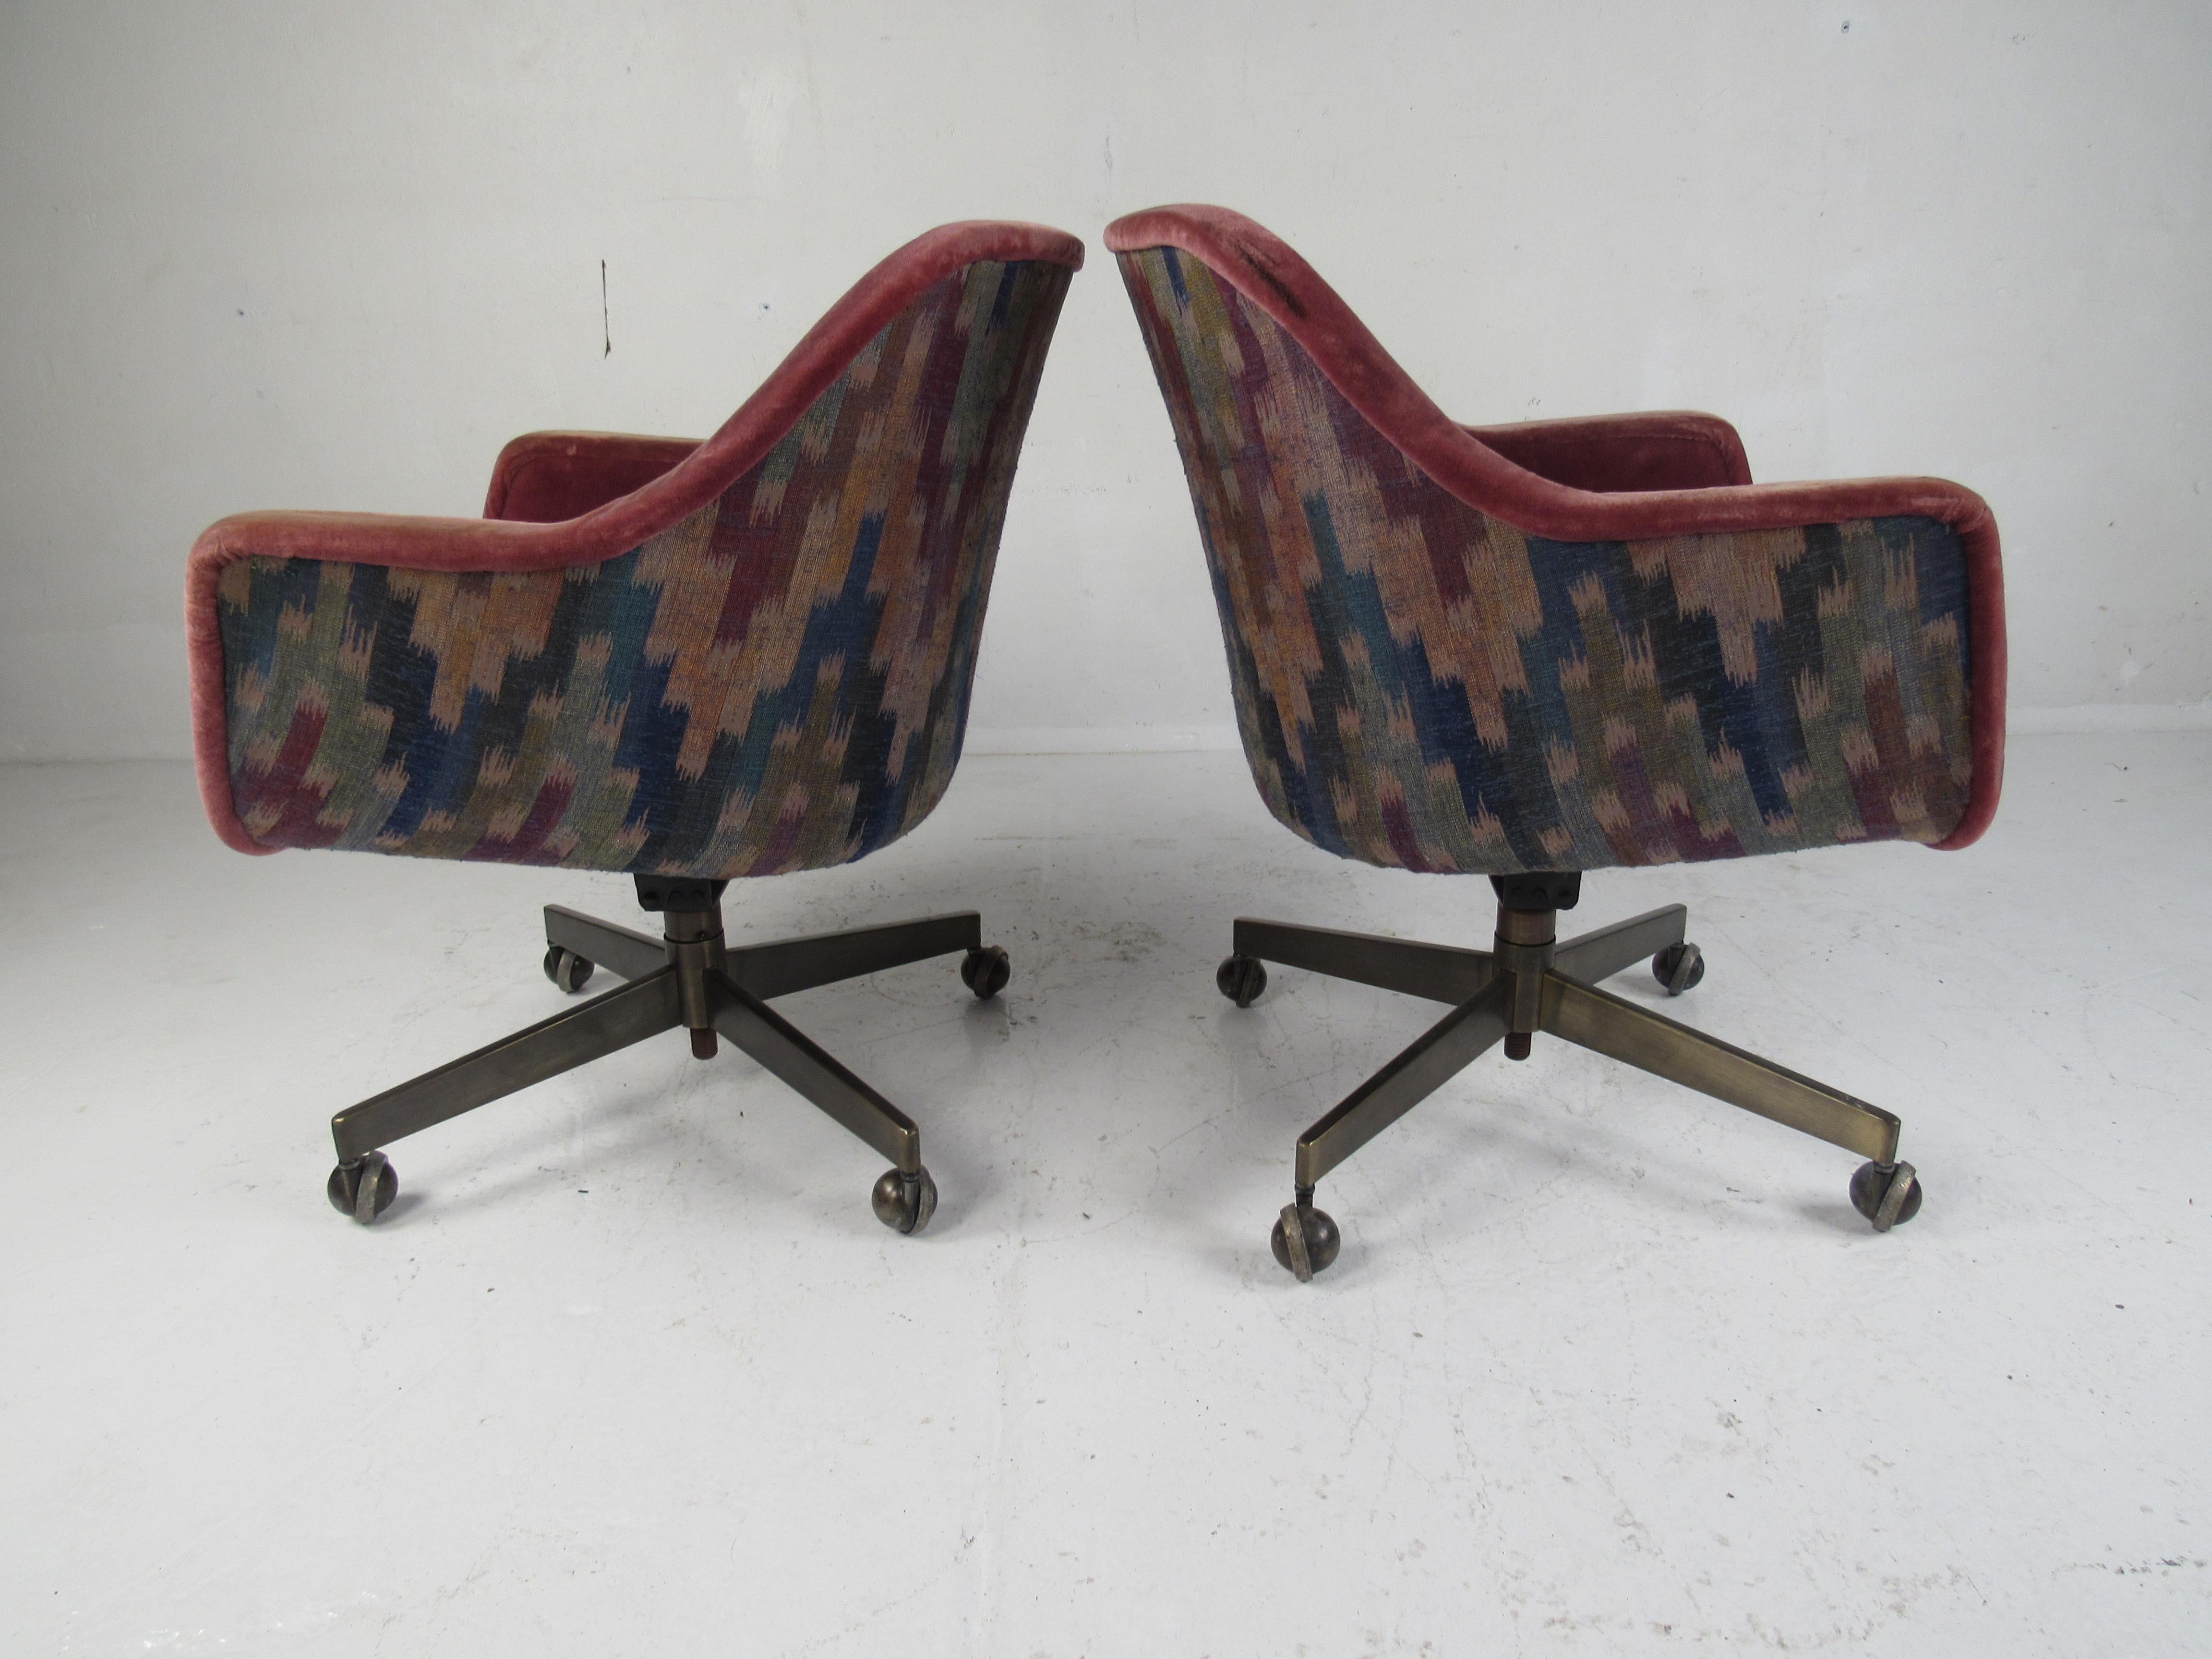 This stylish pair of vintage desk chairs by Barrit Furniture boast swivel metal bases and comfortable bucket style seats. A sleek design with plush upholstery adding to the midcentury appeal. Please confirm item location (NY or NJ).